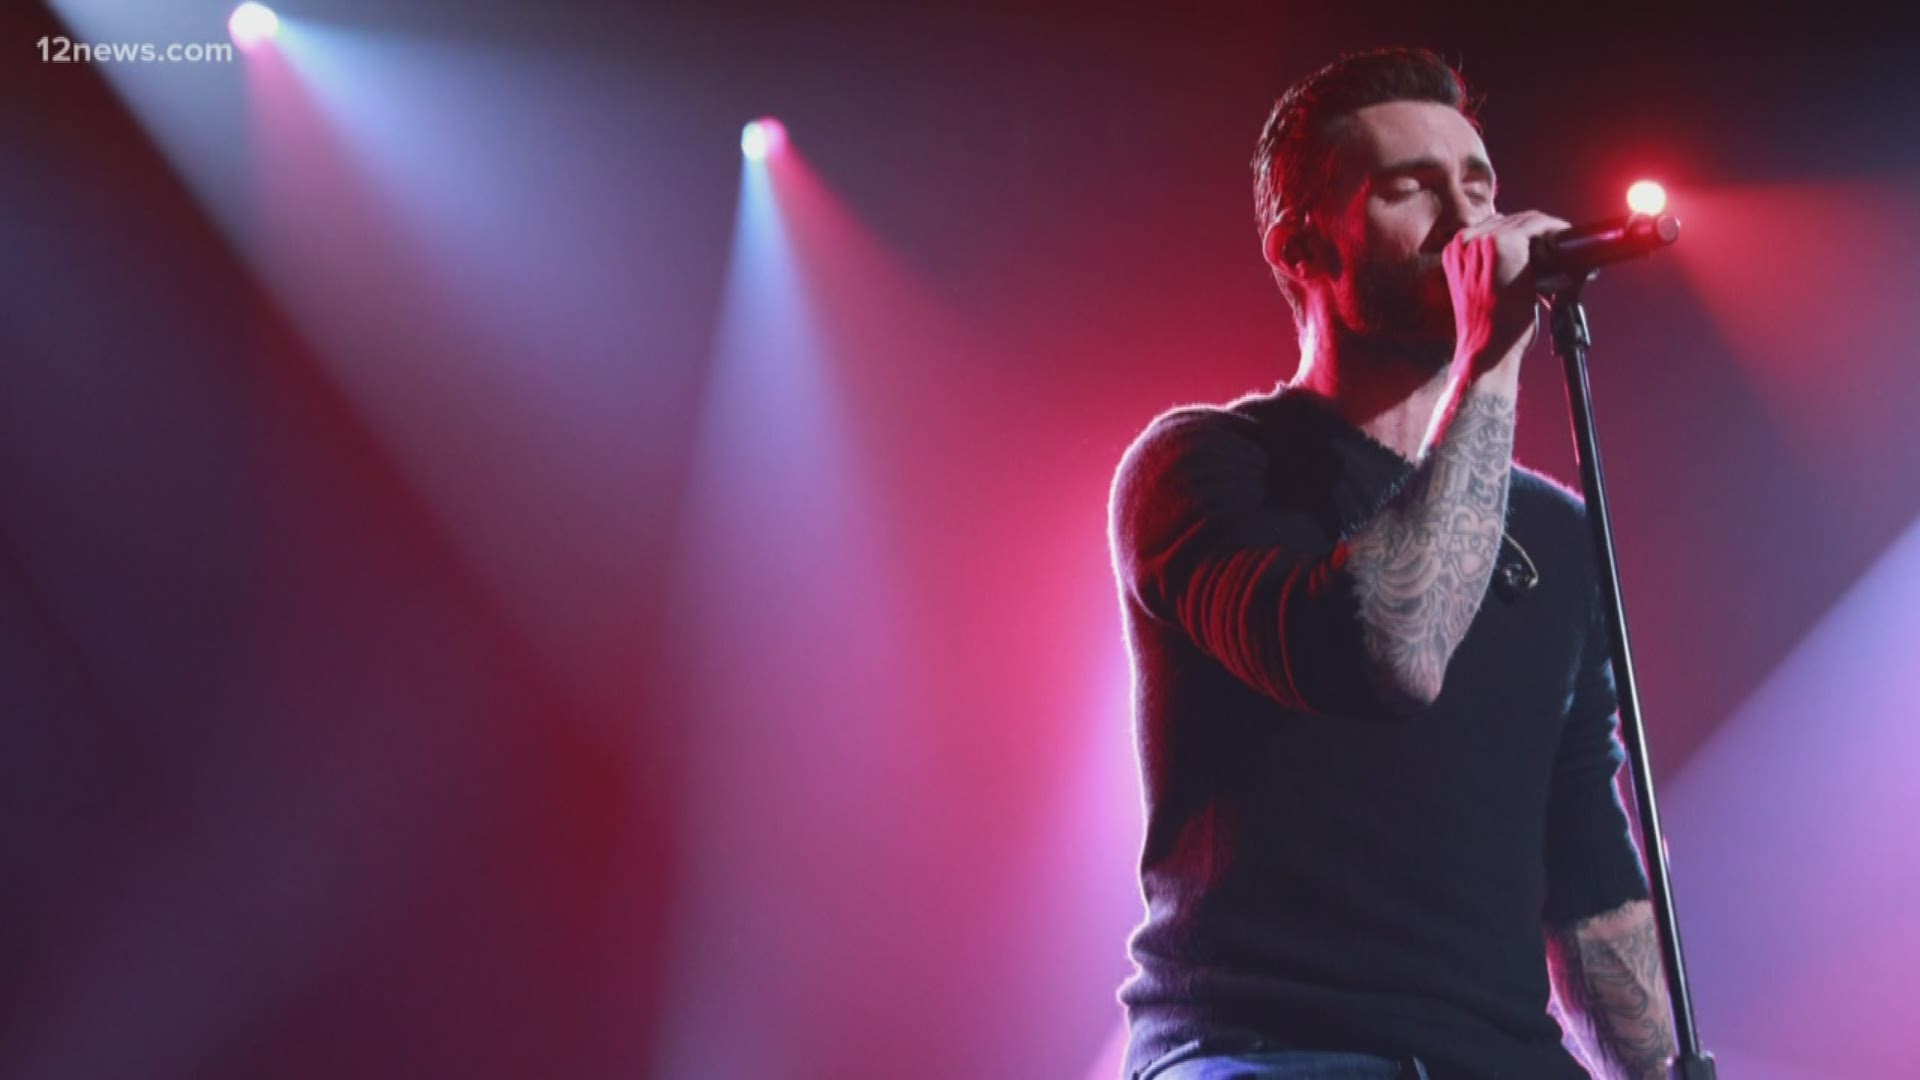 Maroon 5's new tour for 2020 is coming to AK-Chin Pavilion in Phoenix with a 7 p.m. performance on Sunday, May 31.